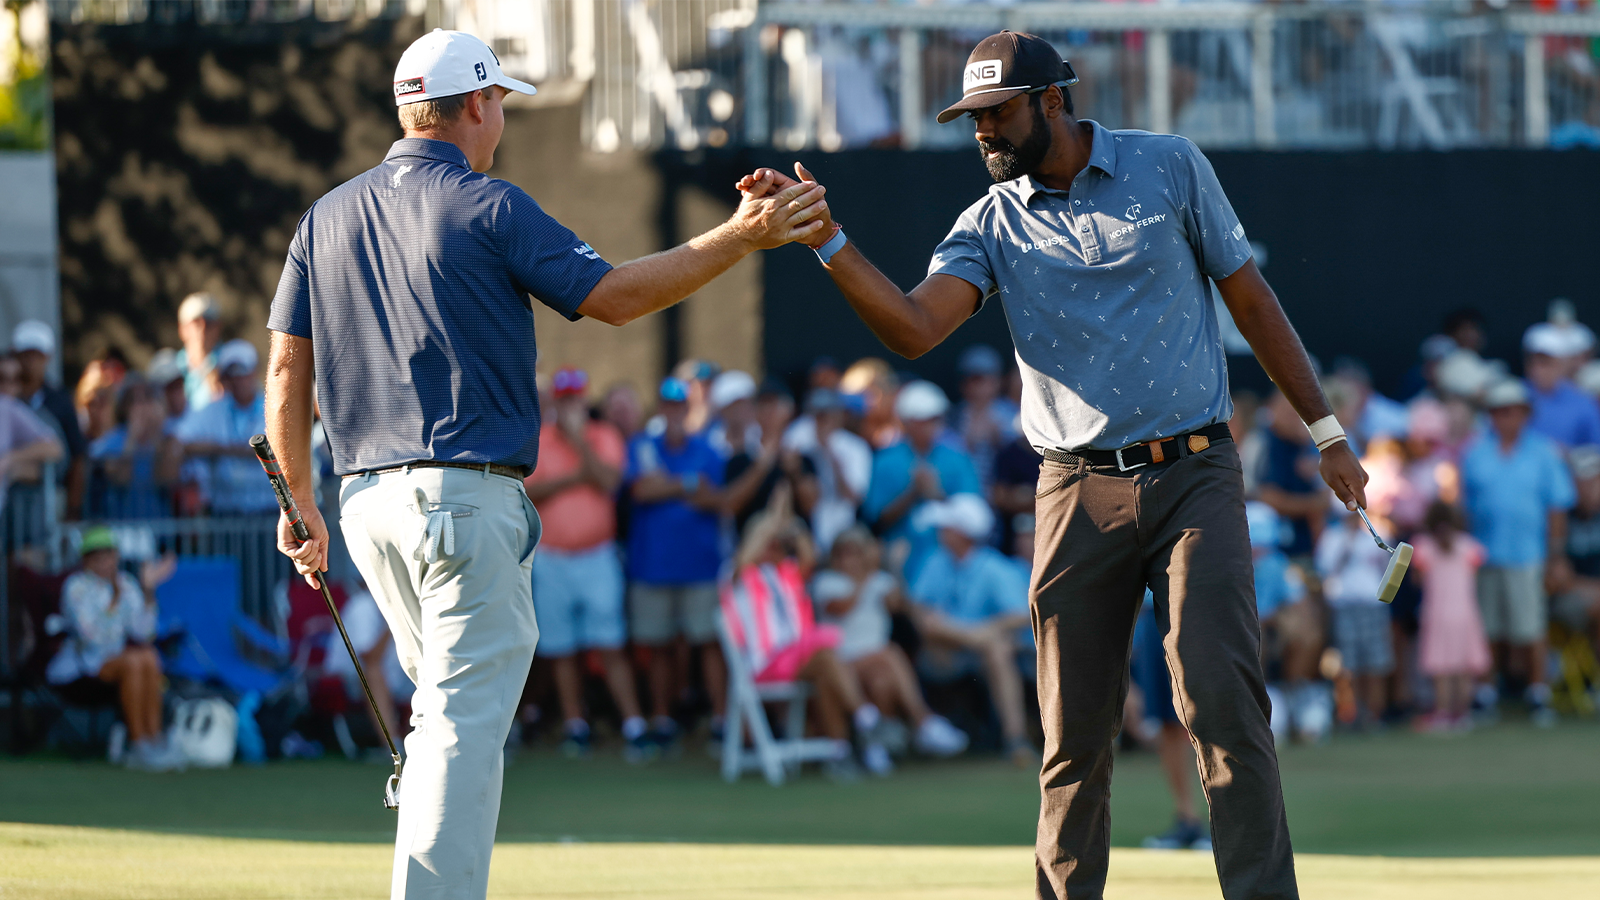 Sahith Theegala celebrates with Tom Hoge of the United States after putting the winning birdie on the eighteenth green during the final round of the QBE Shootout at Tiburon Golf Club on December 11, 2022 in Naples, Florida. (Photo by Douglas P. DeFelice/Getty Images)